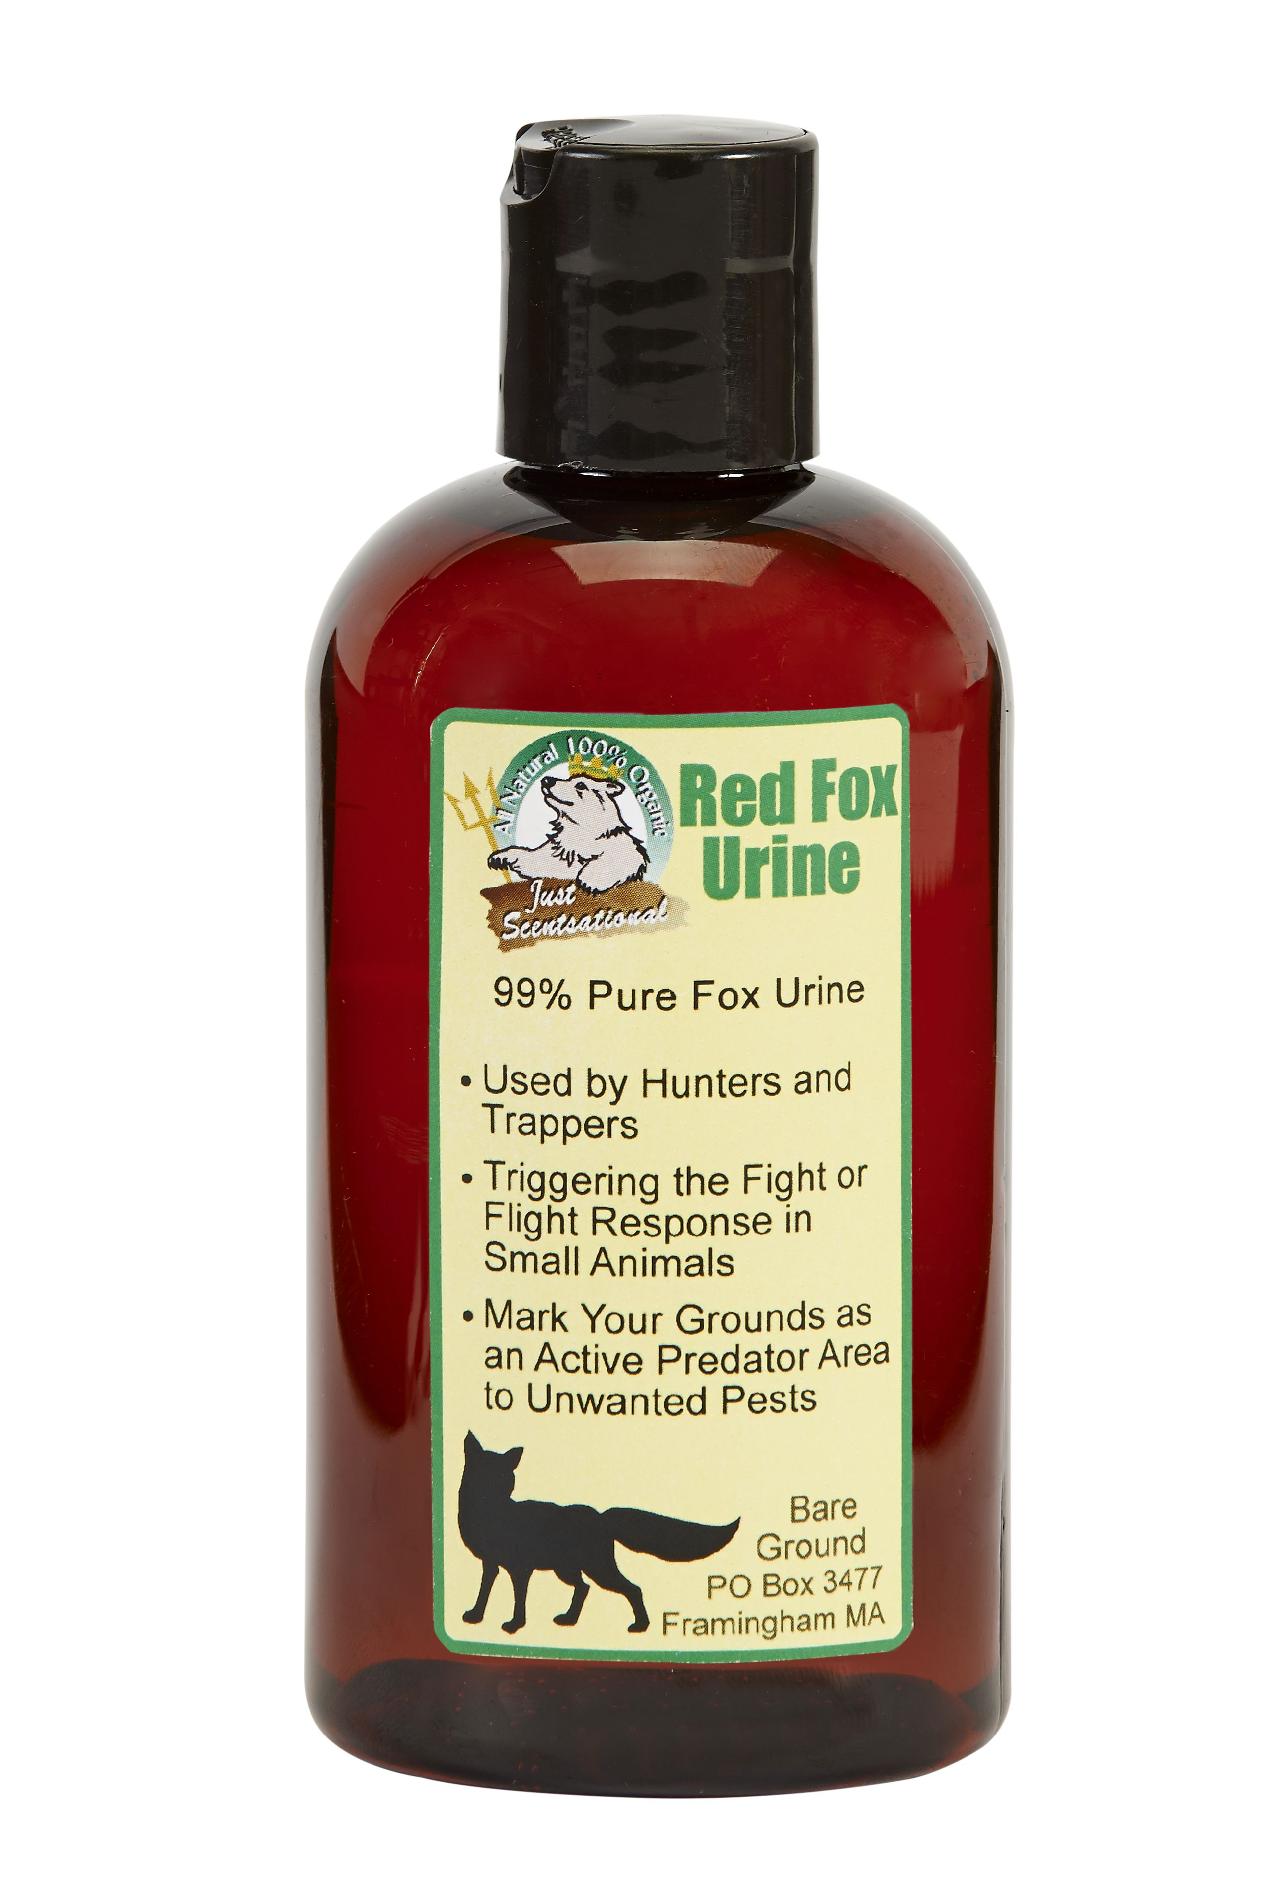 Just Scentsational 8 oz bottle of pure 100% meat fed red fox urine